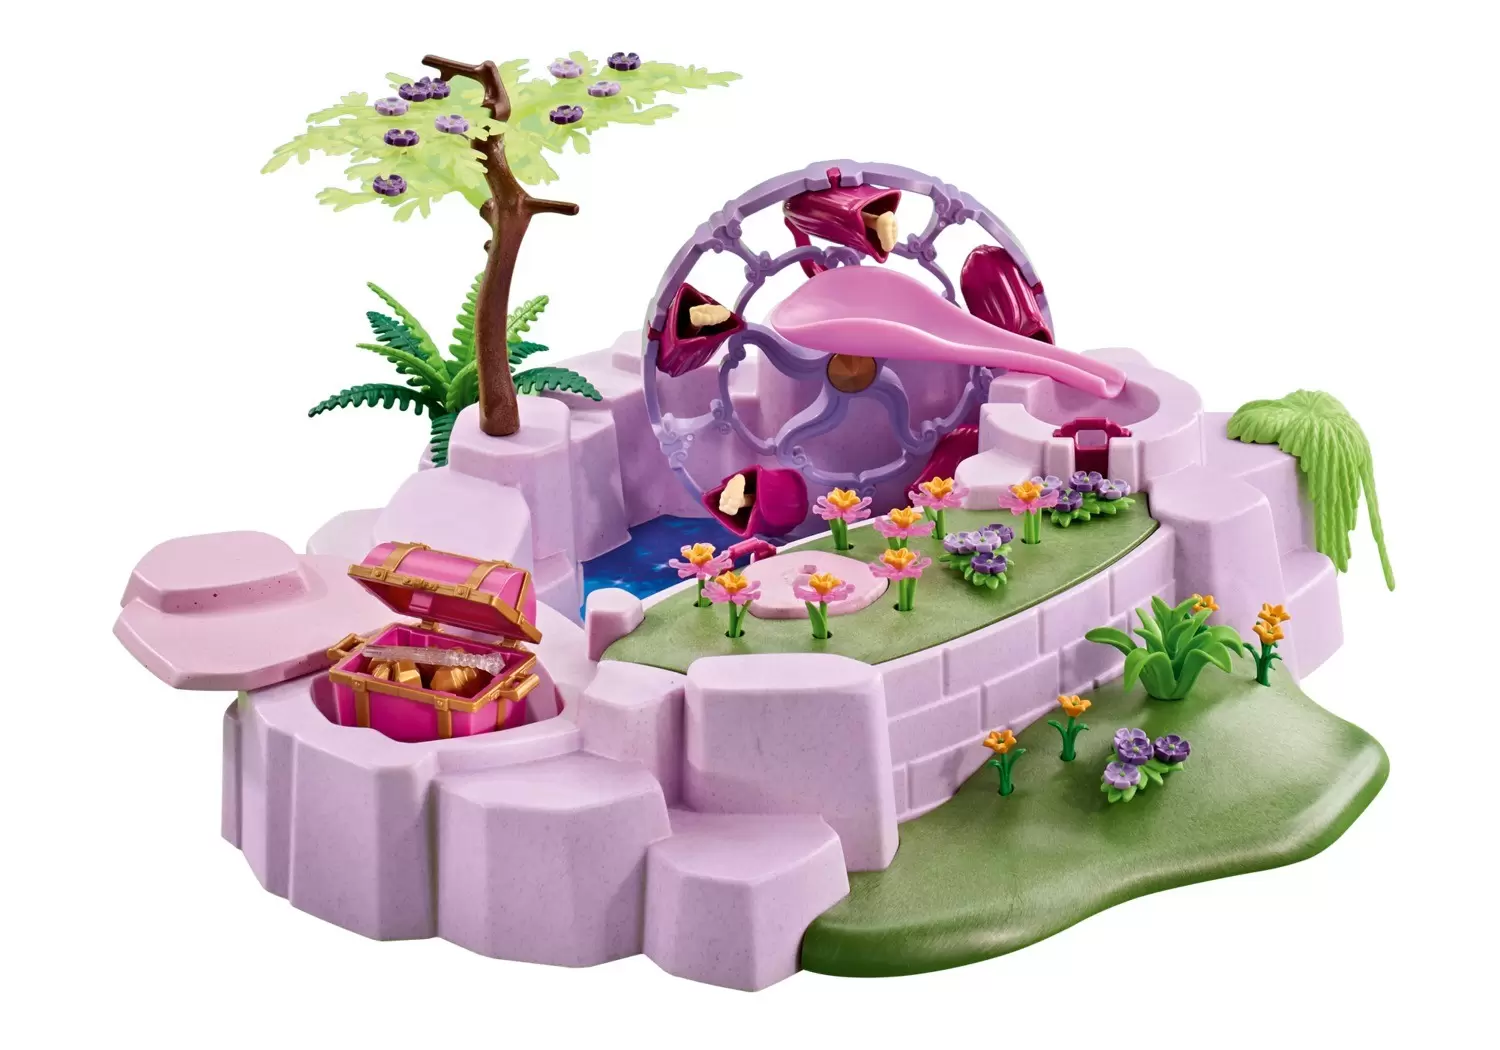 Playmobil Fairies - Bewitched pond